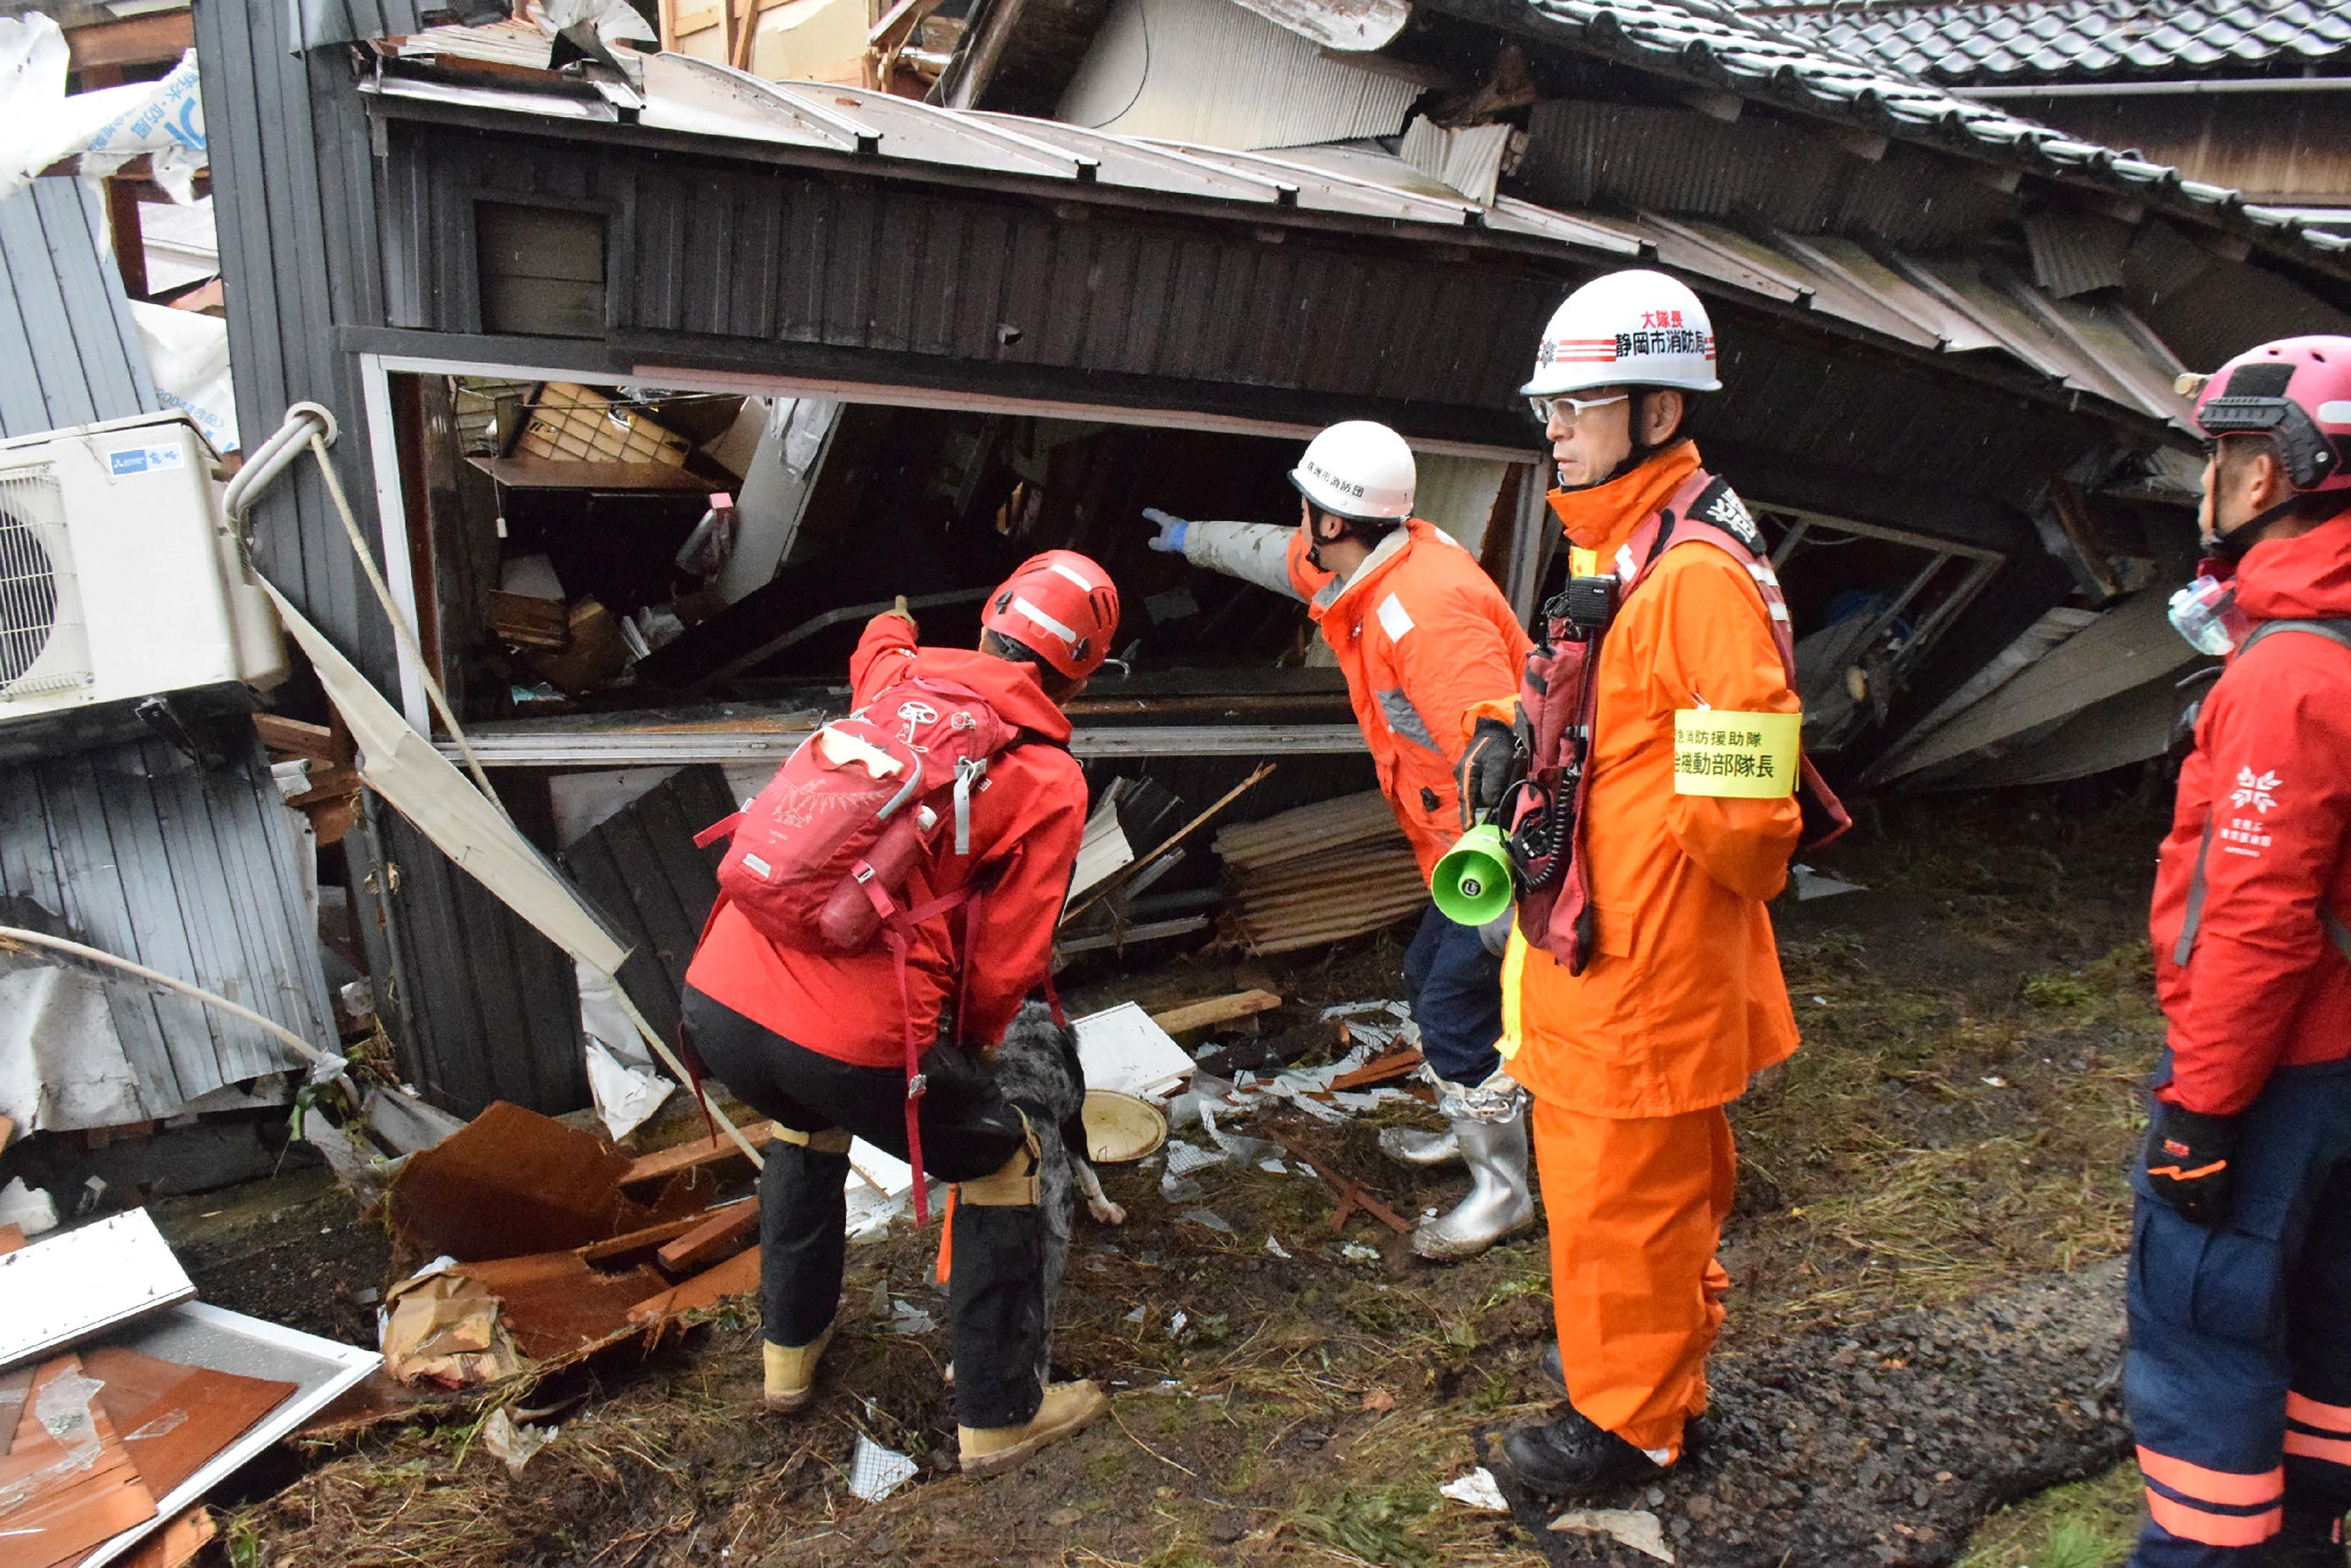 Firefighters search a collapsed house for survivors